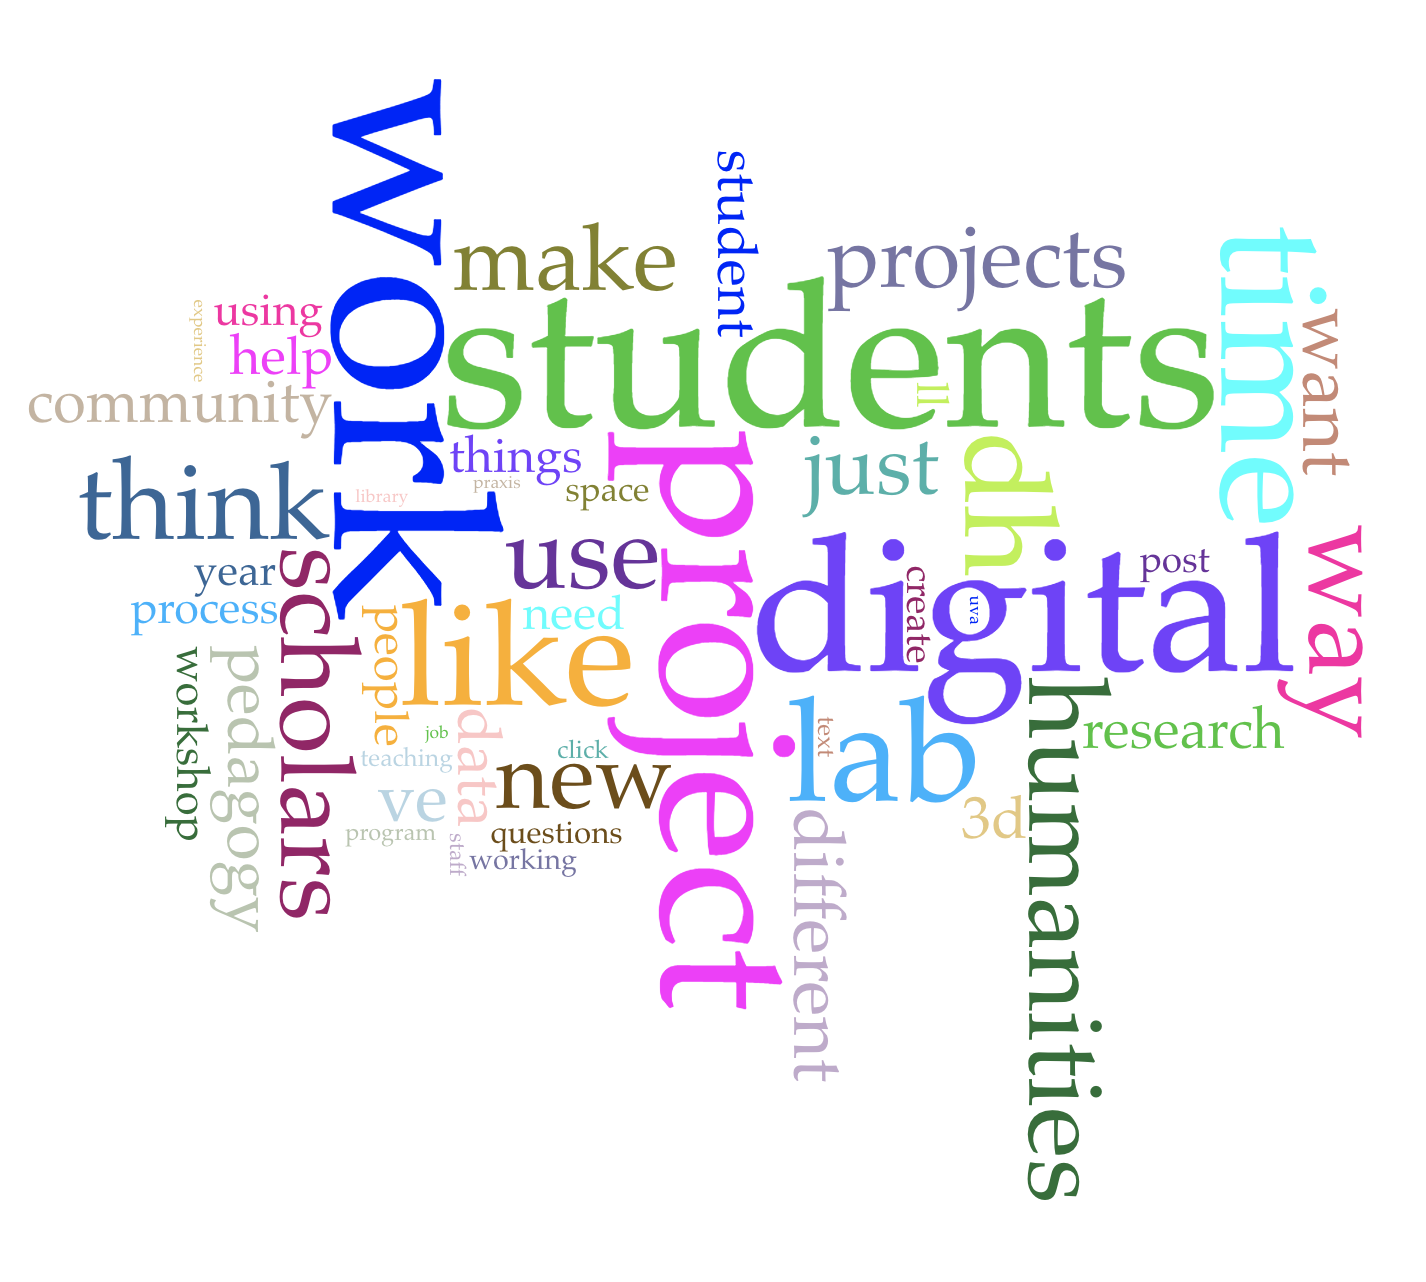 Wordle of most frequently occuring terms in 2019 blog posts on our blog